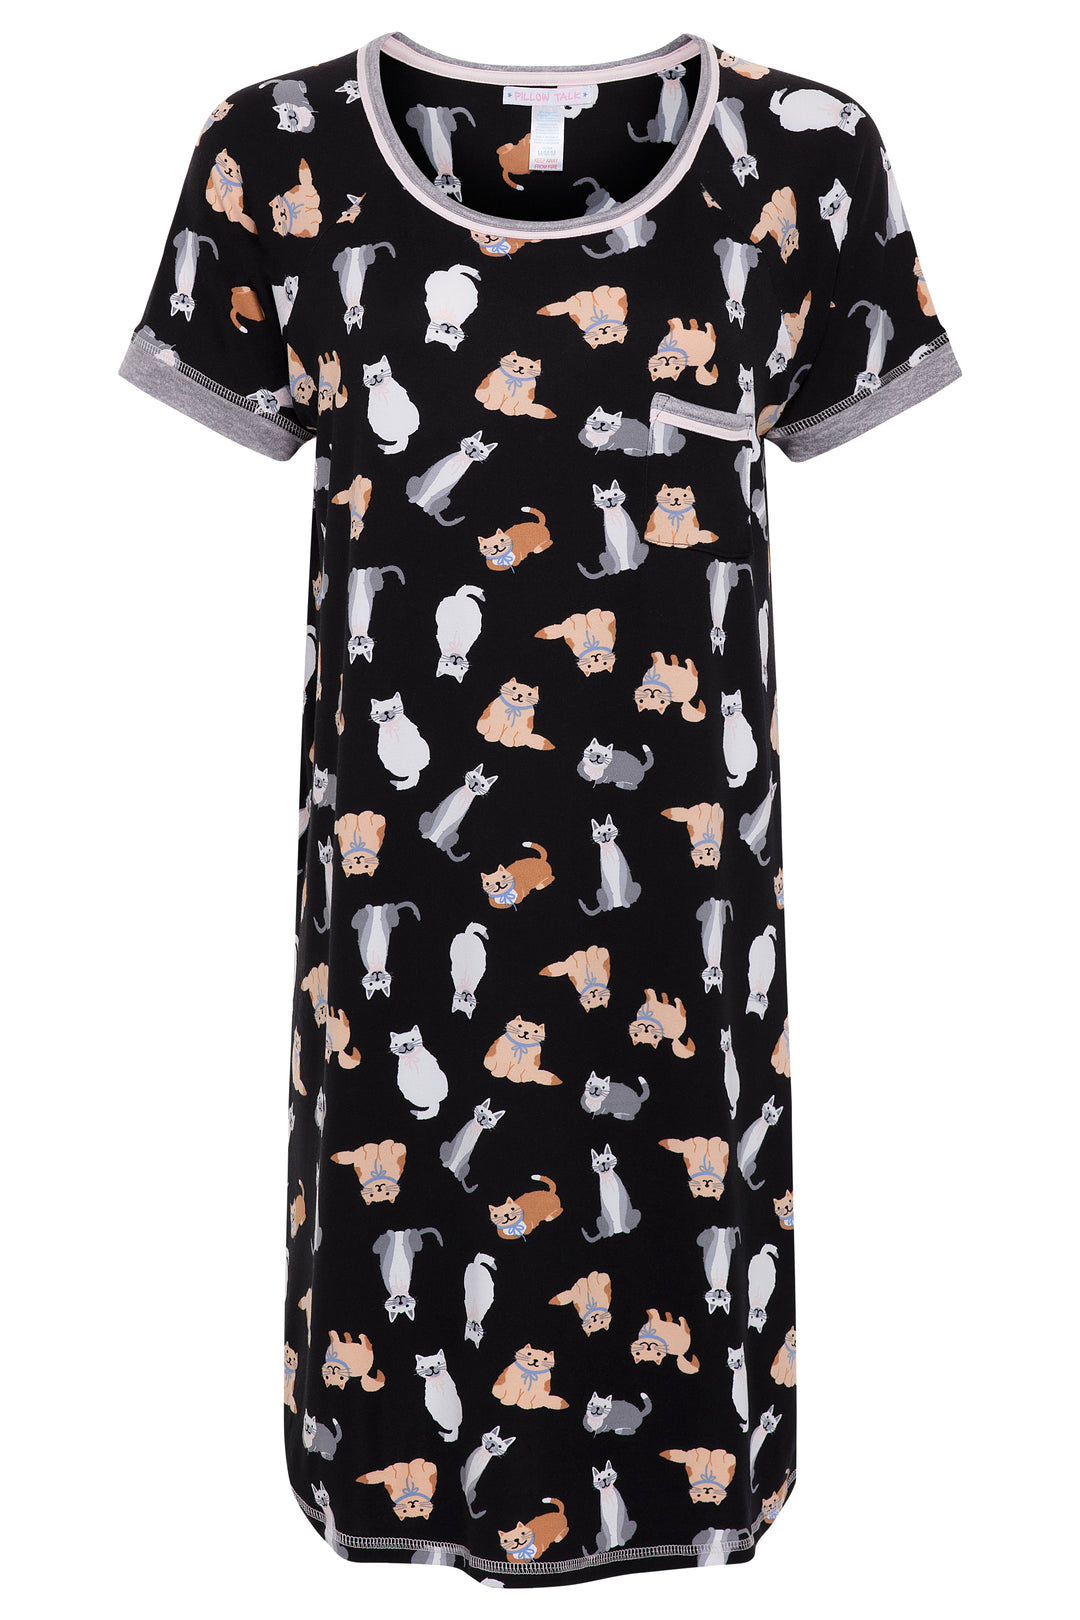 Cats patterned black sleep shirt as part of the René Rofé 2 Pack Soft Lightweight Sleep Shirt in Cats and Owls pattern